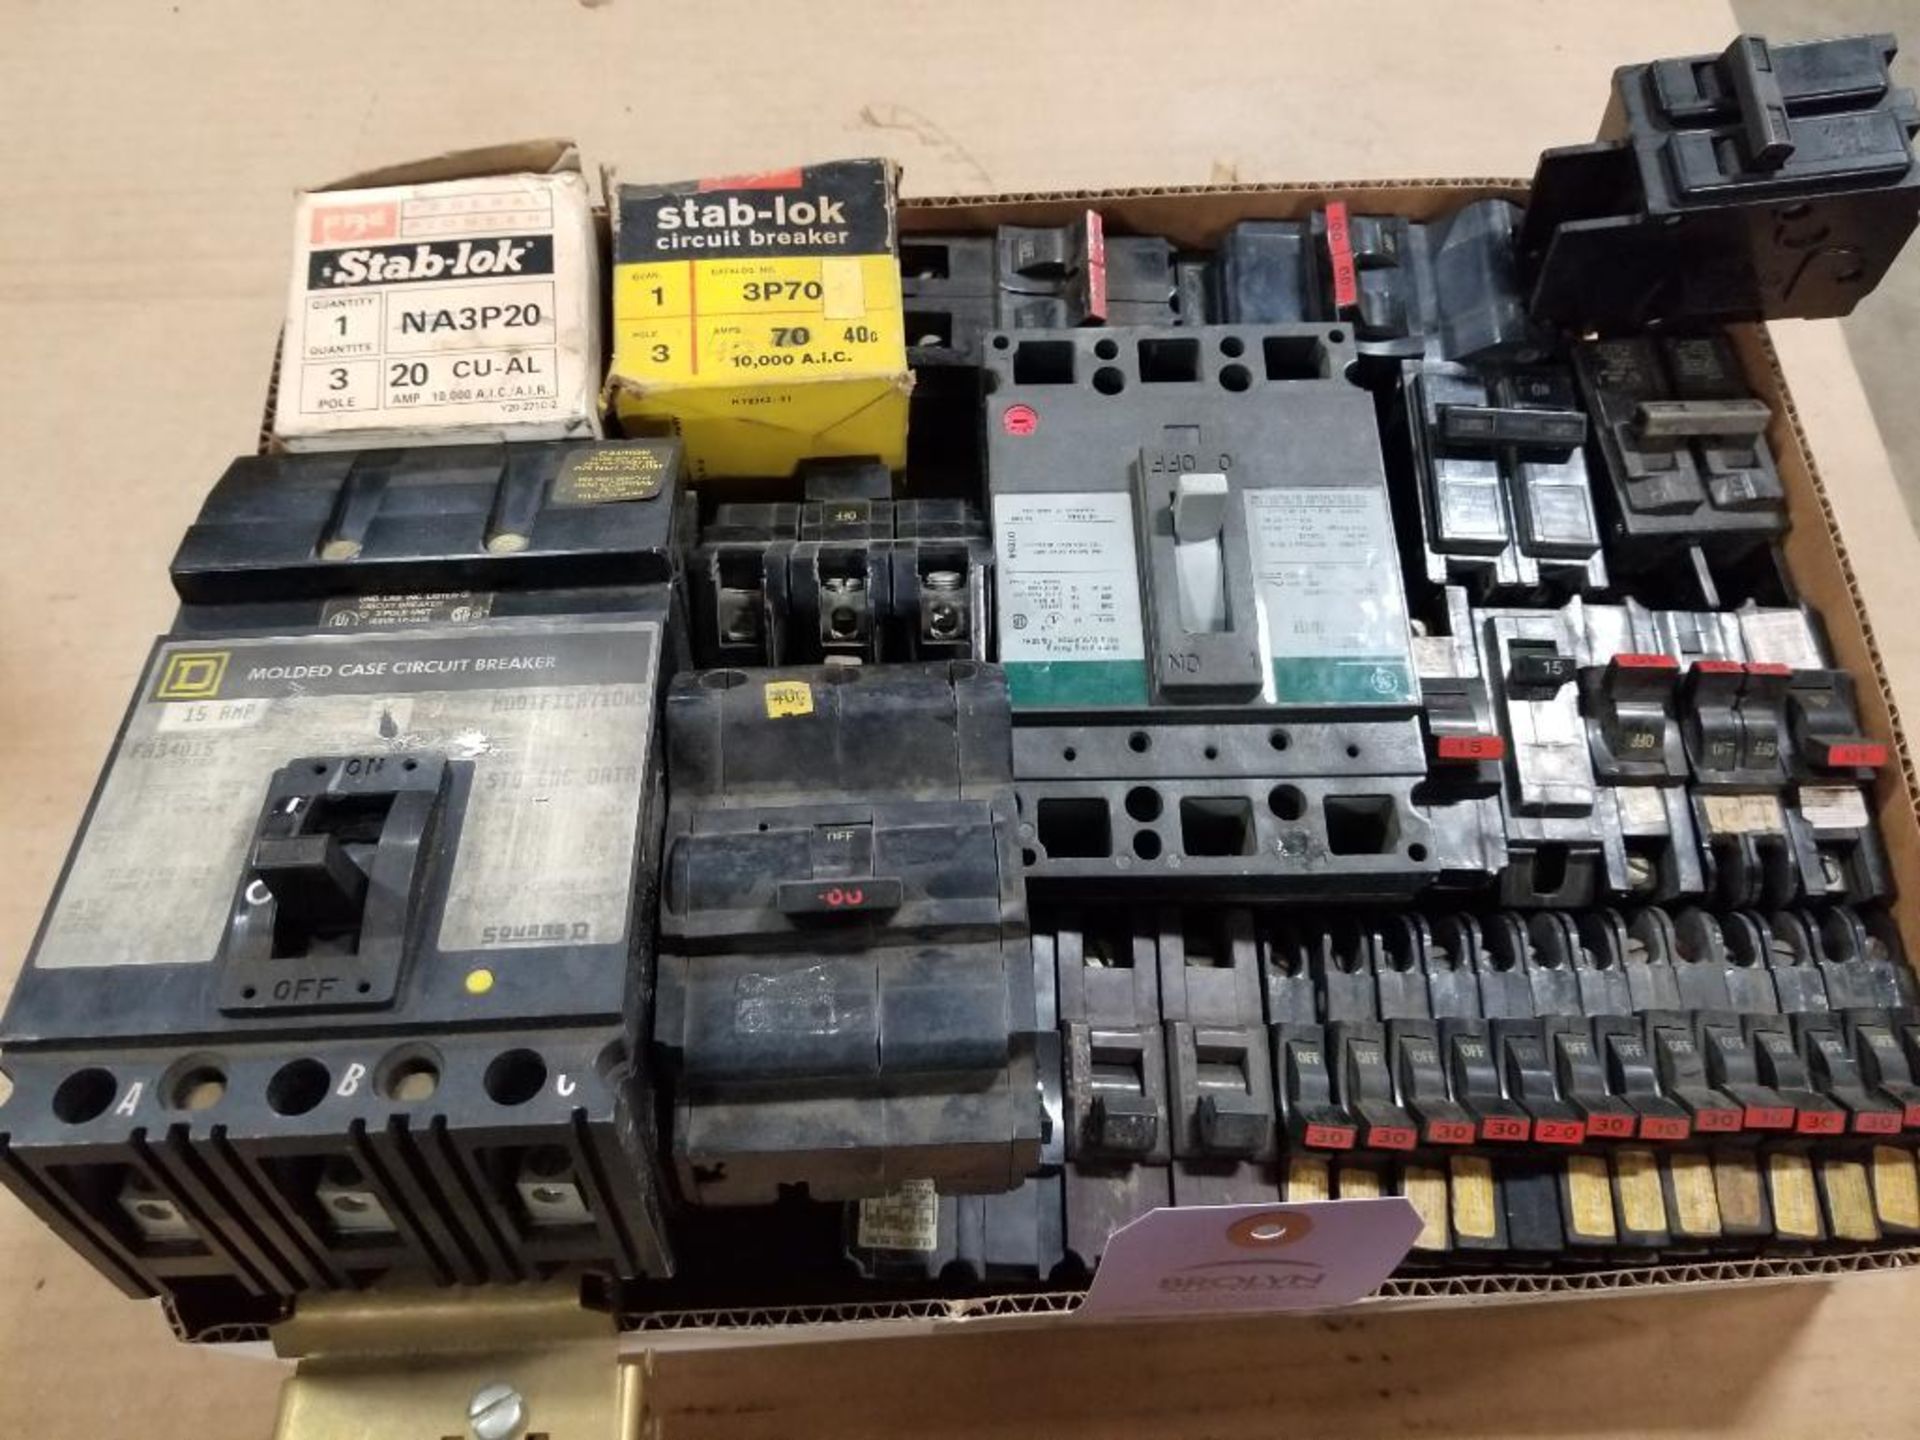 Assorted electrical breakers. Square-D, GE, Stab-lok. - Image 12 of 12